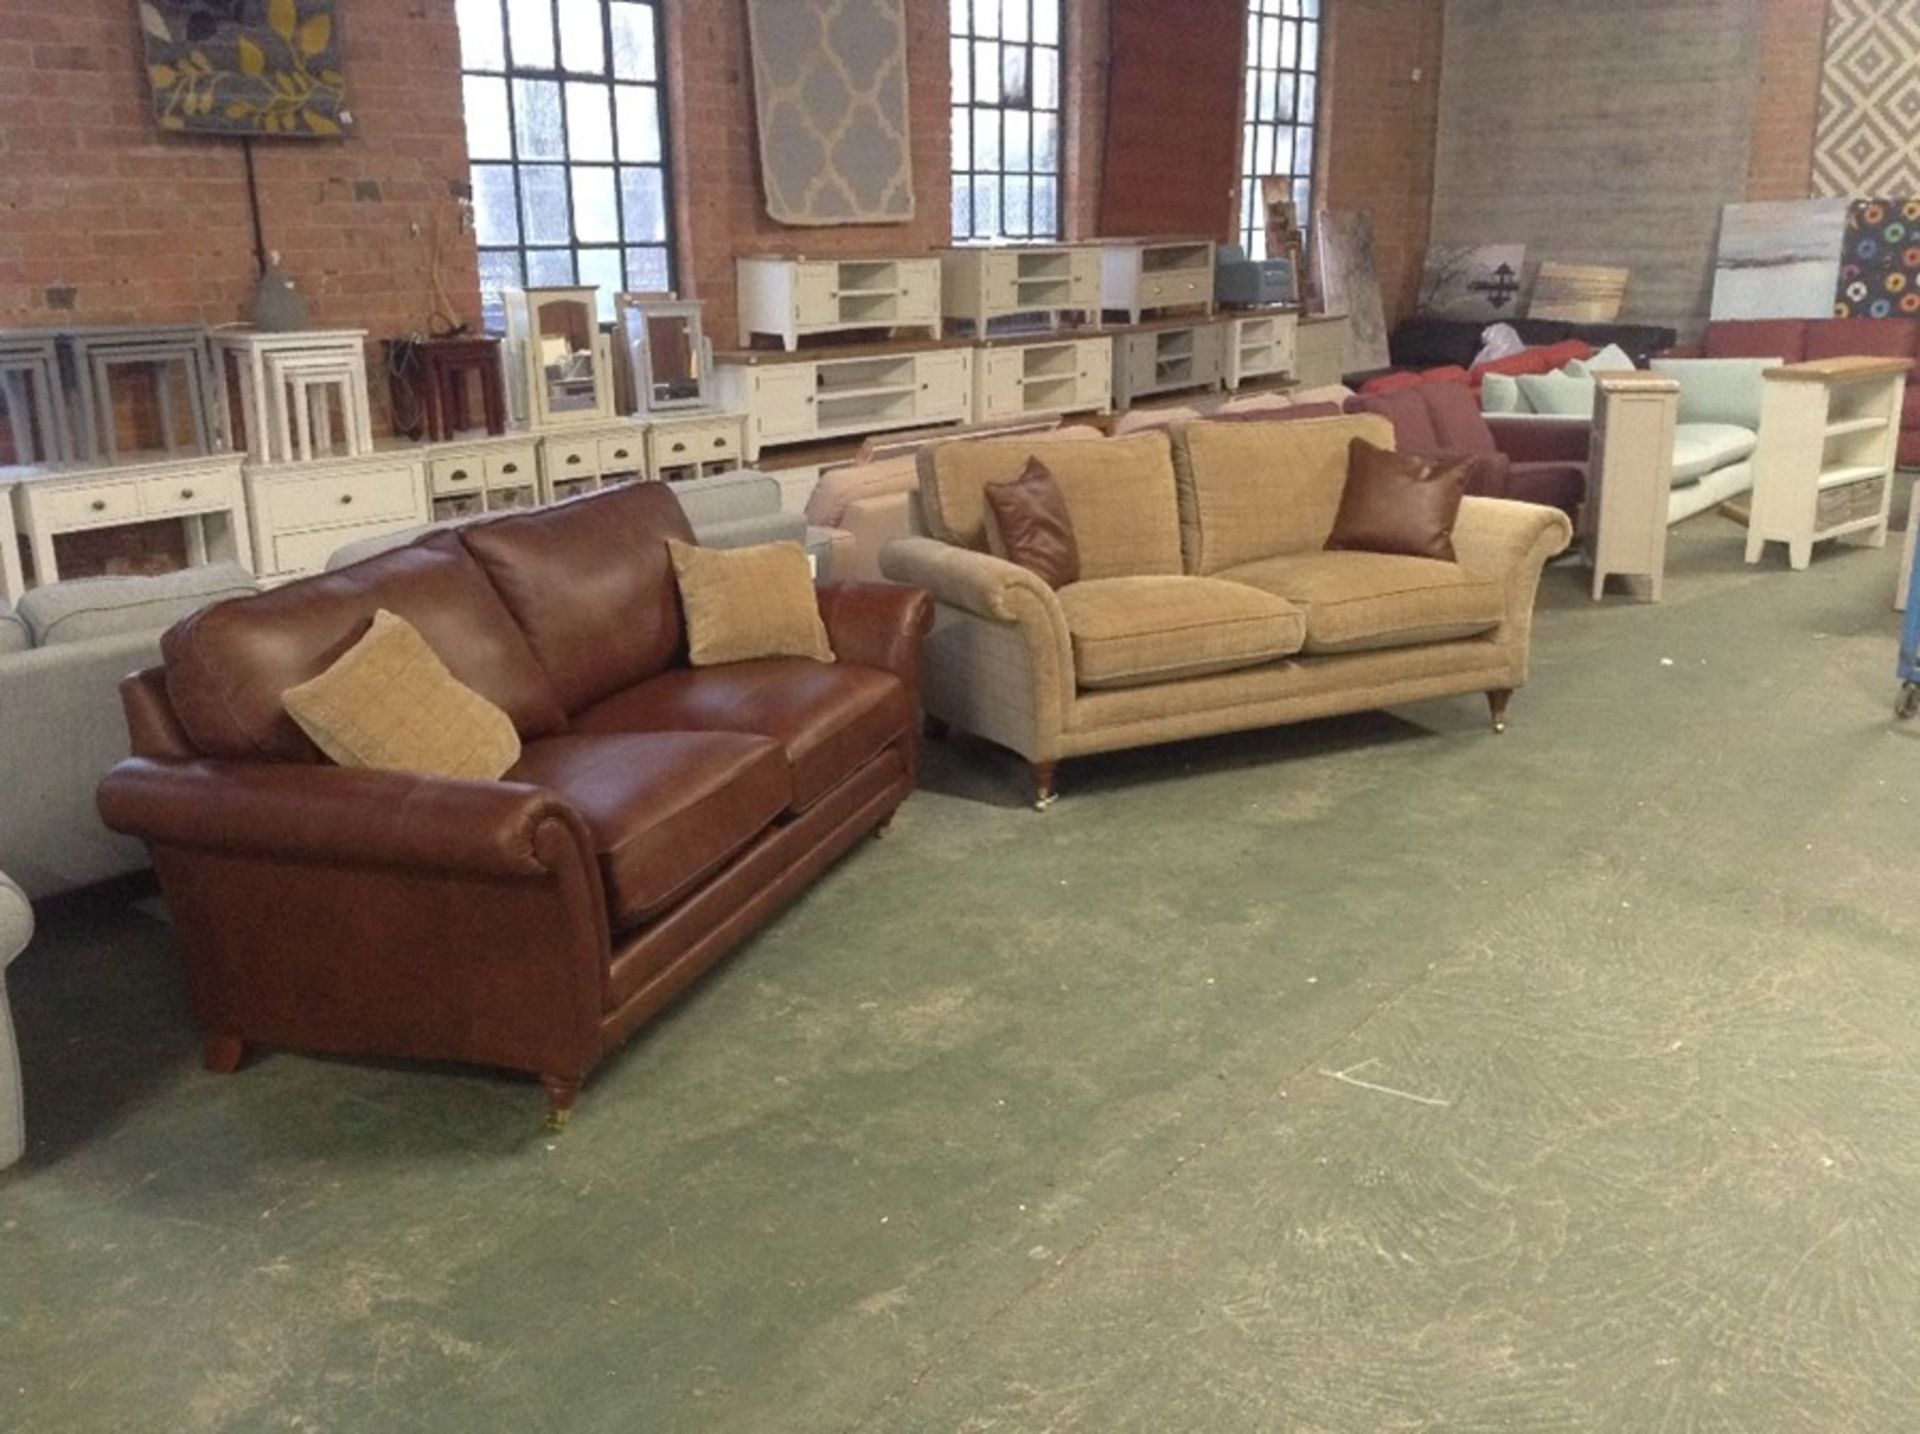 BROWN LEATHER 3 SEATER SOFA & BEIGE CHECK 3 SEATER